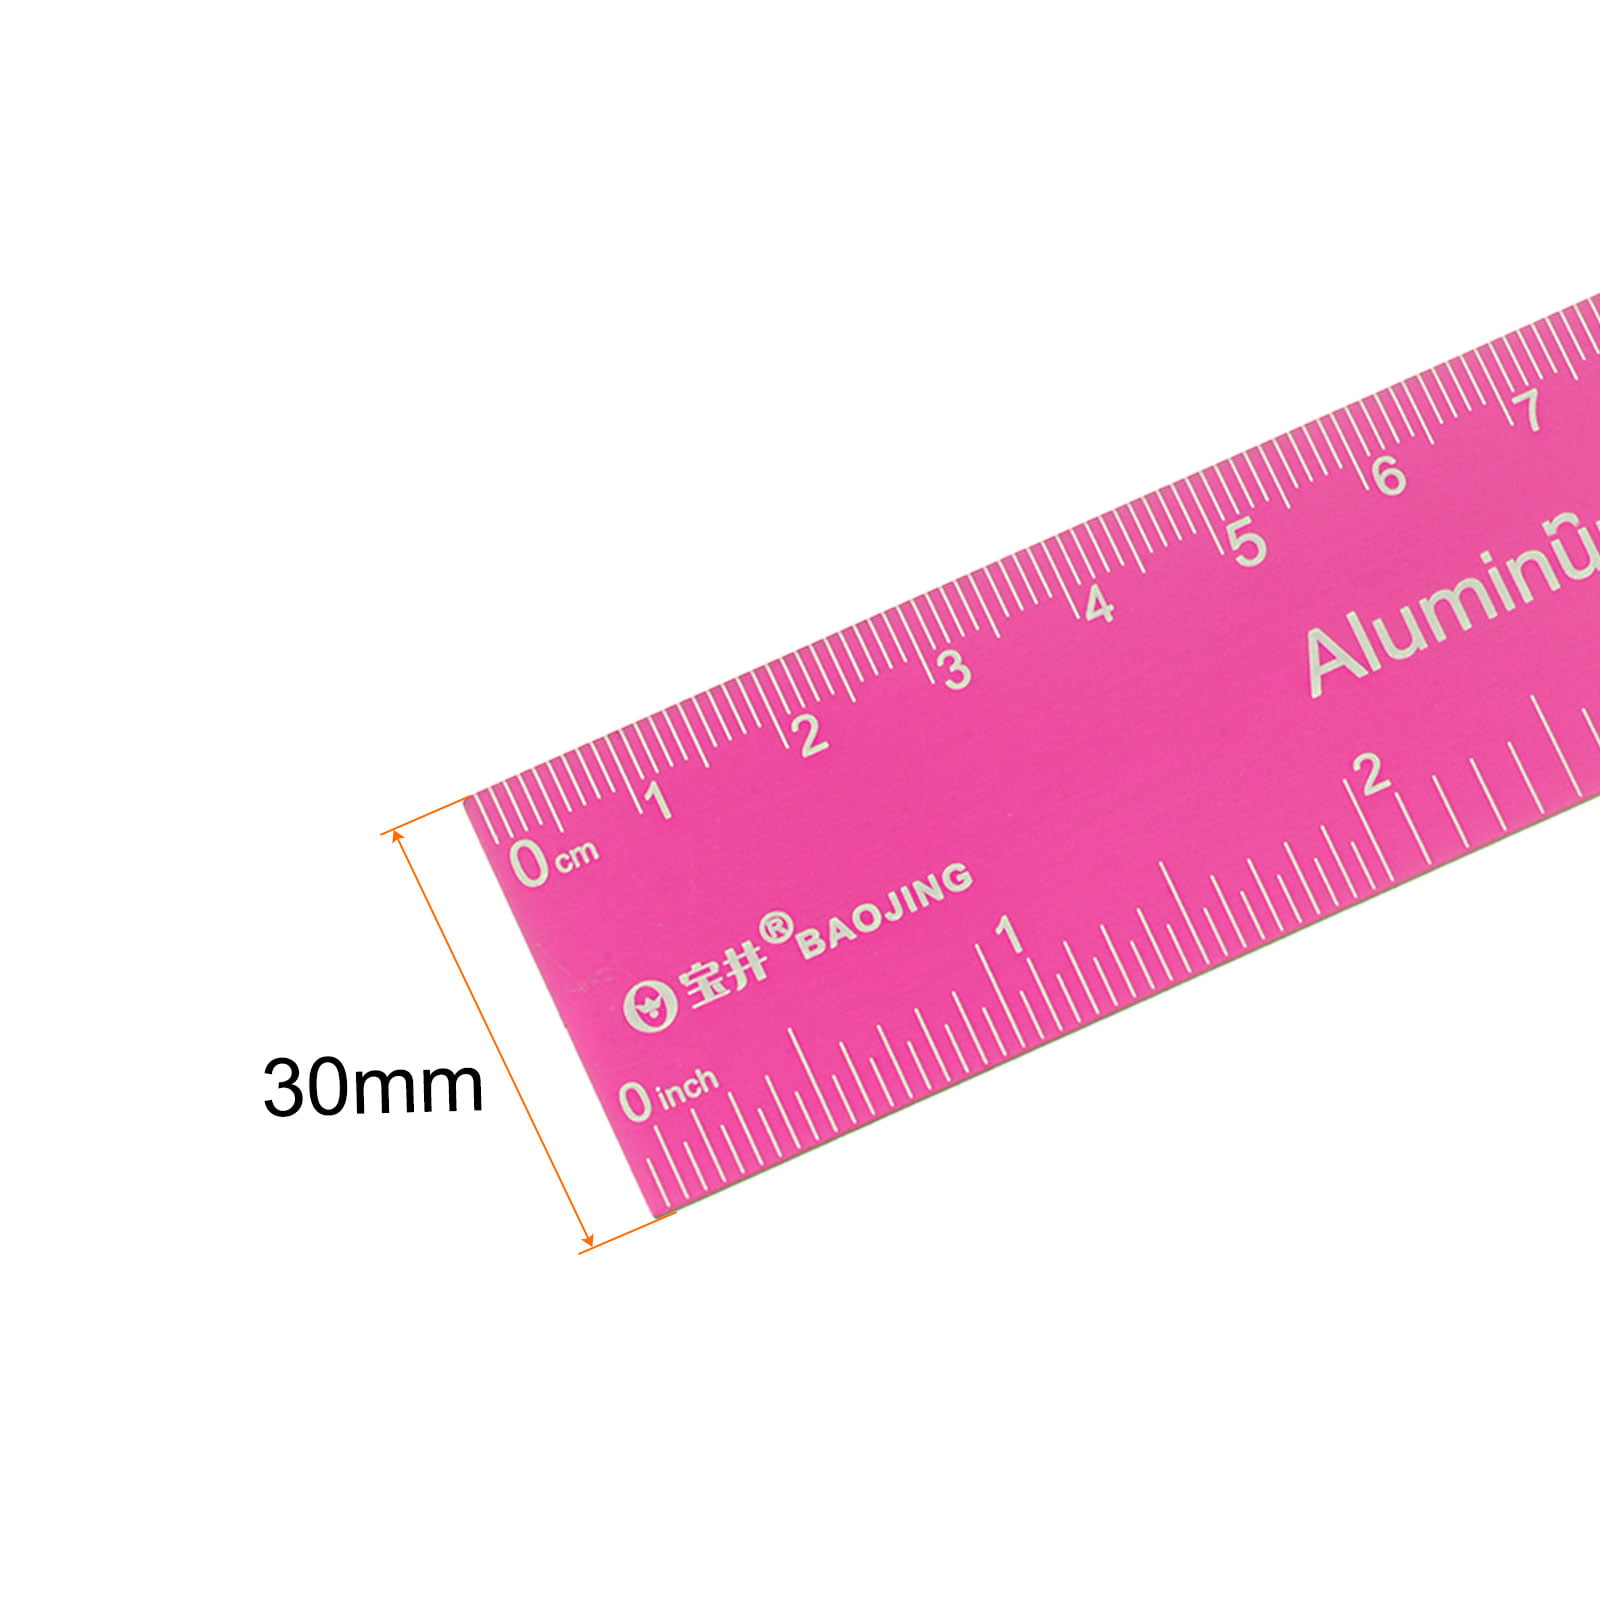 Straight Ruler 6 Inch Metric English Magnifier Measuring Tool, Hot Pink